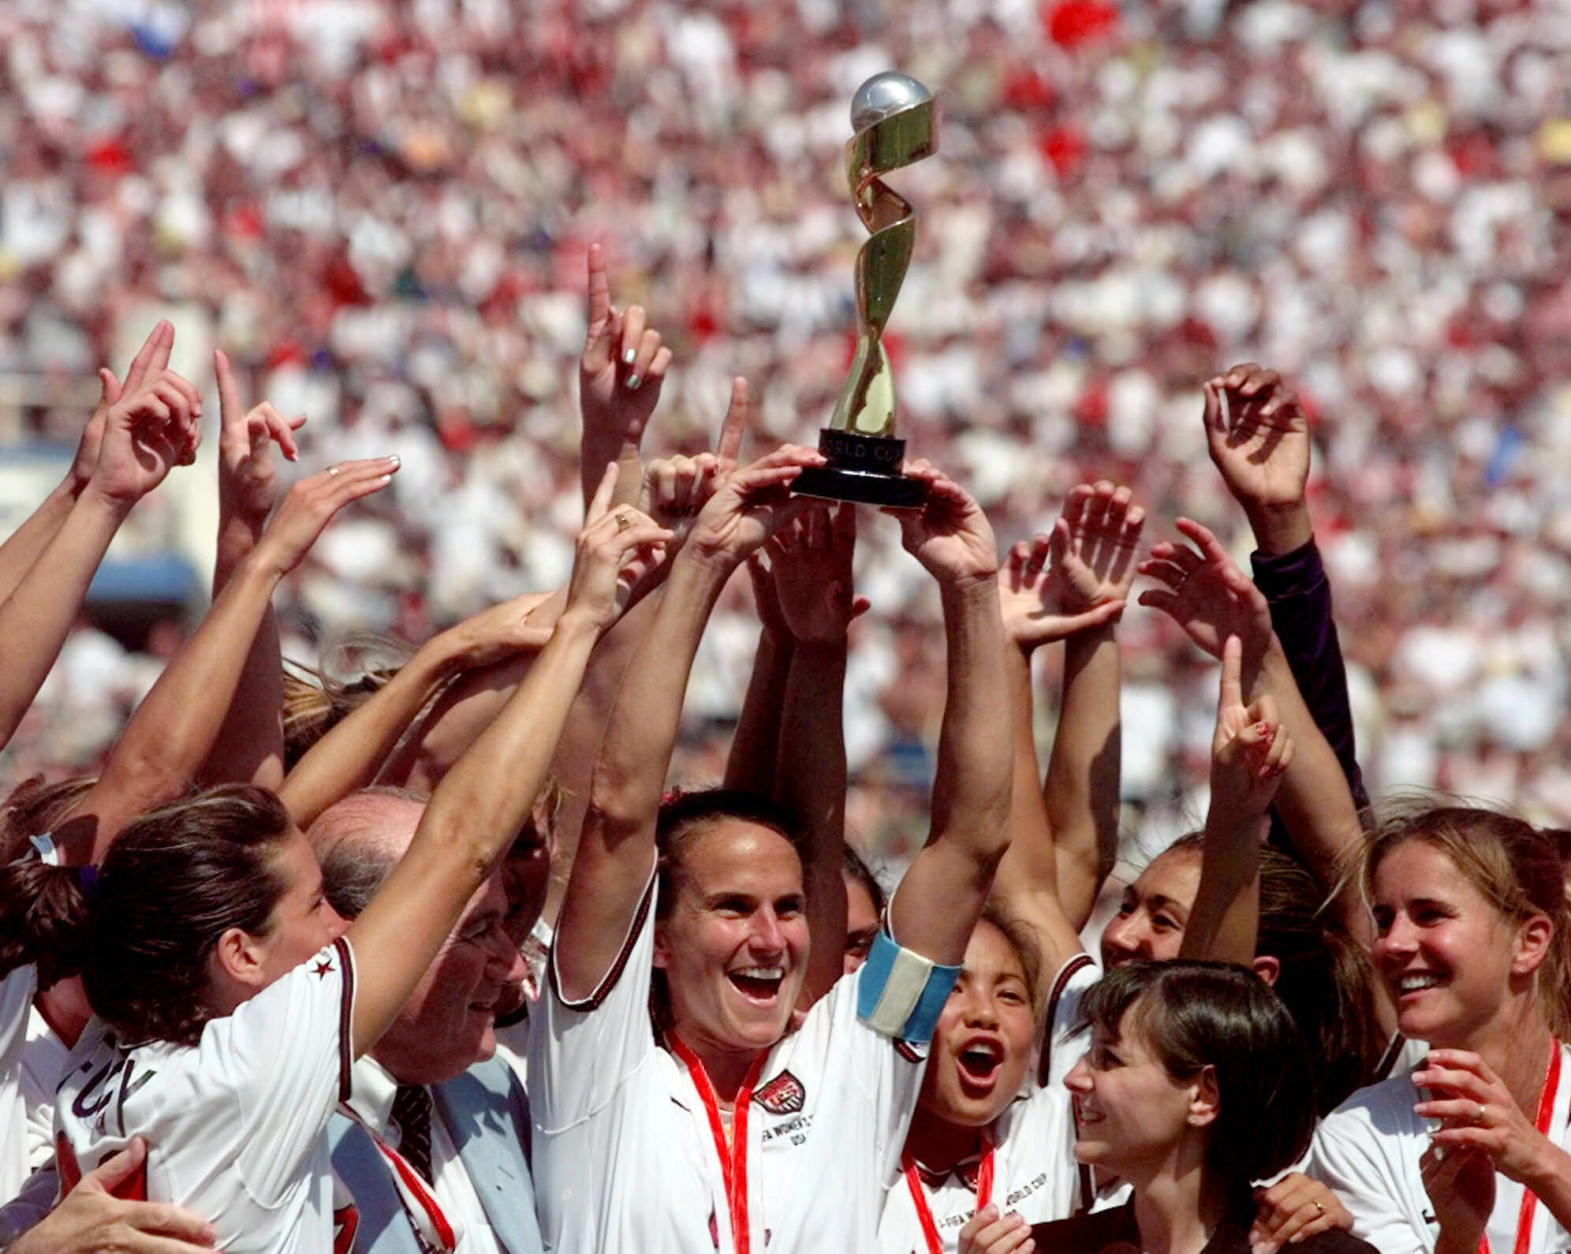 ADVANCE FOR WEEKEND EDITIONS, JUNE 11-12 - FILE - In this July 10, 1999 file photo, the United States soccer team captain Carla Overbeck, center, the U.S. team and FIFA President Sepp Blatter, left of Overbeck, celebrate with the trophy after defeating China in a 5-4 in a penalty shootout in the Women's World Cup Final at the Rose Bowl in Pasadena, Calif. They were pioneers, and they were rock stars. A dozen years later, they remain the most famous women's team in U.S. sports. (AP Photo/Michael Caulfield, File)